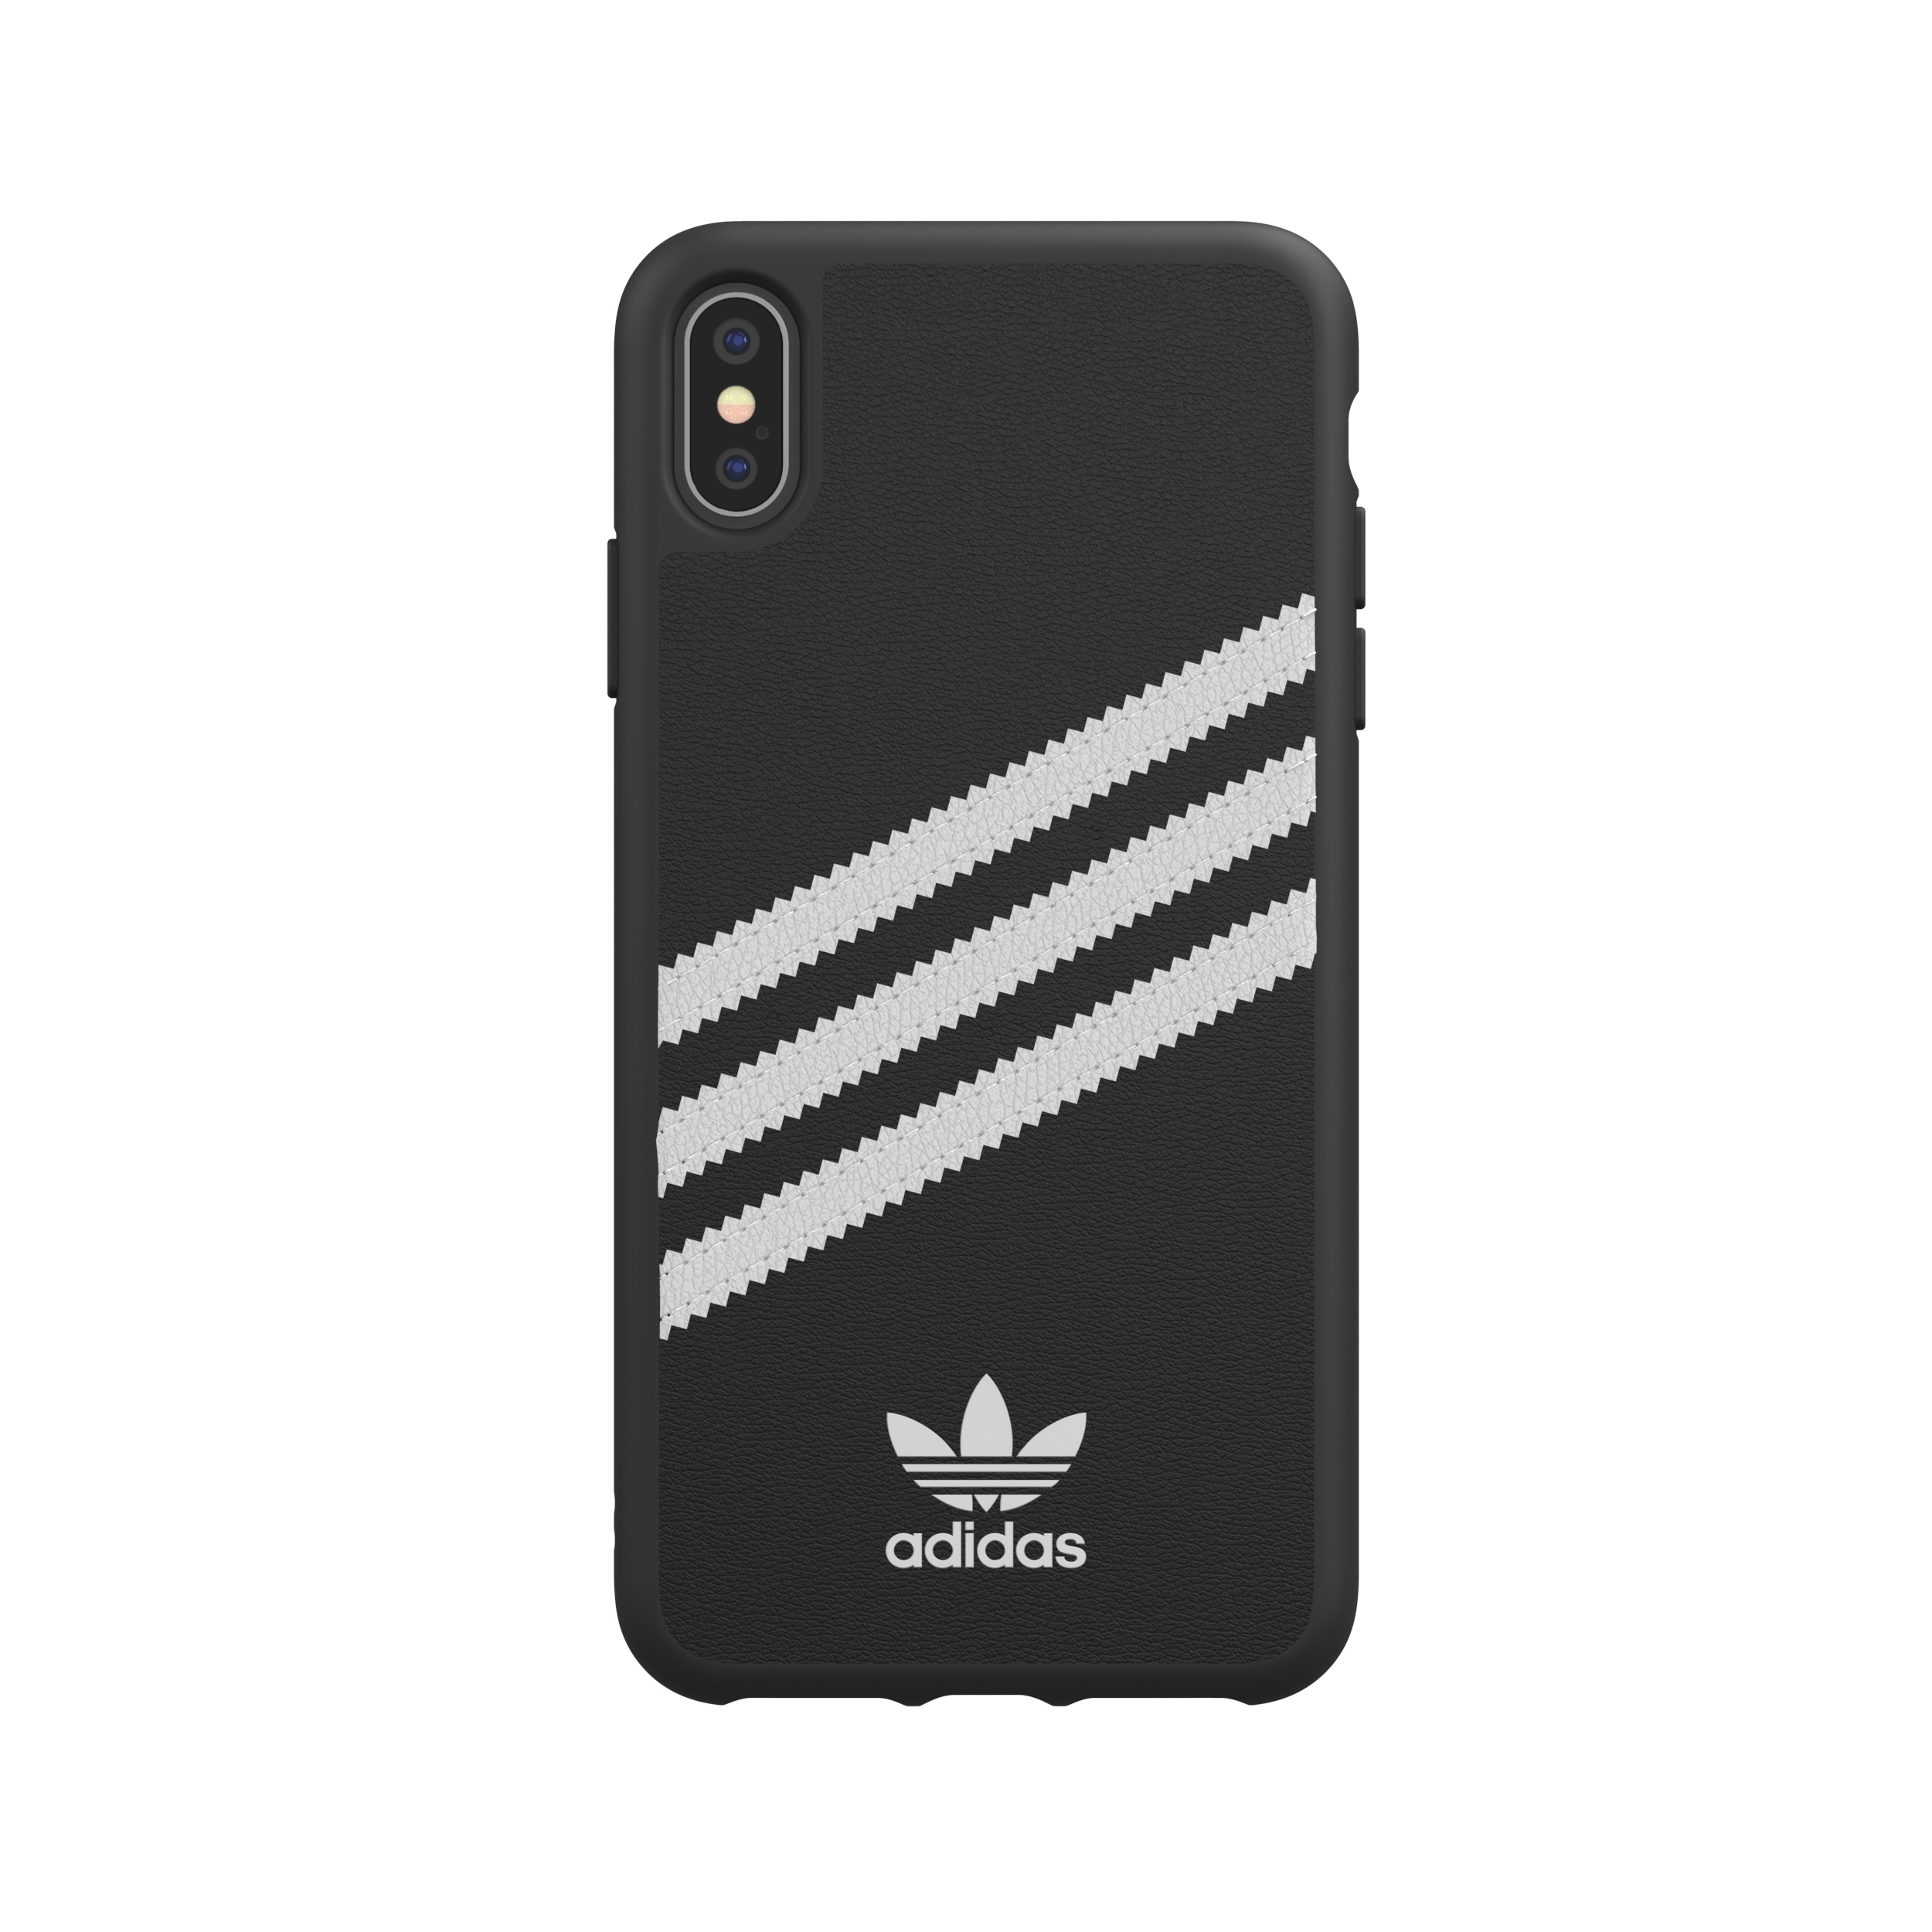 ADIDAS Moulded Case PU, Backcover, BLACK APPLE, XS MAX, IPHONE